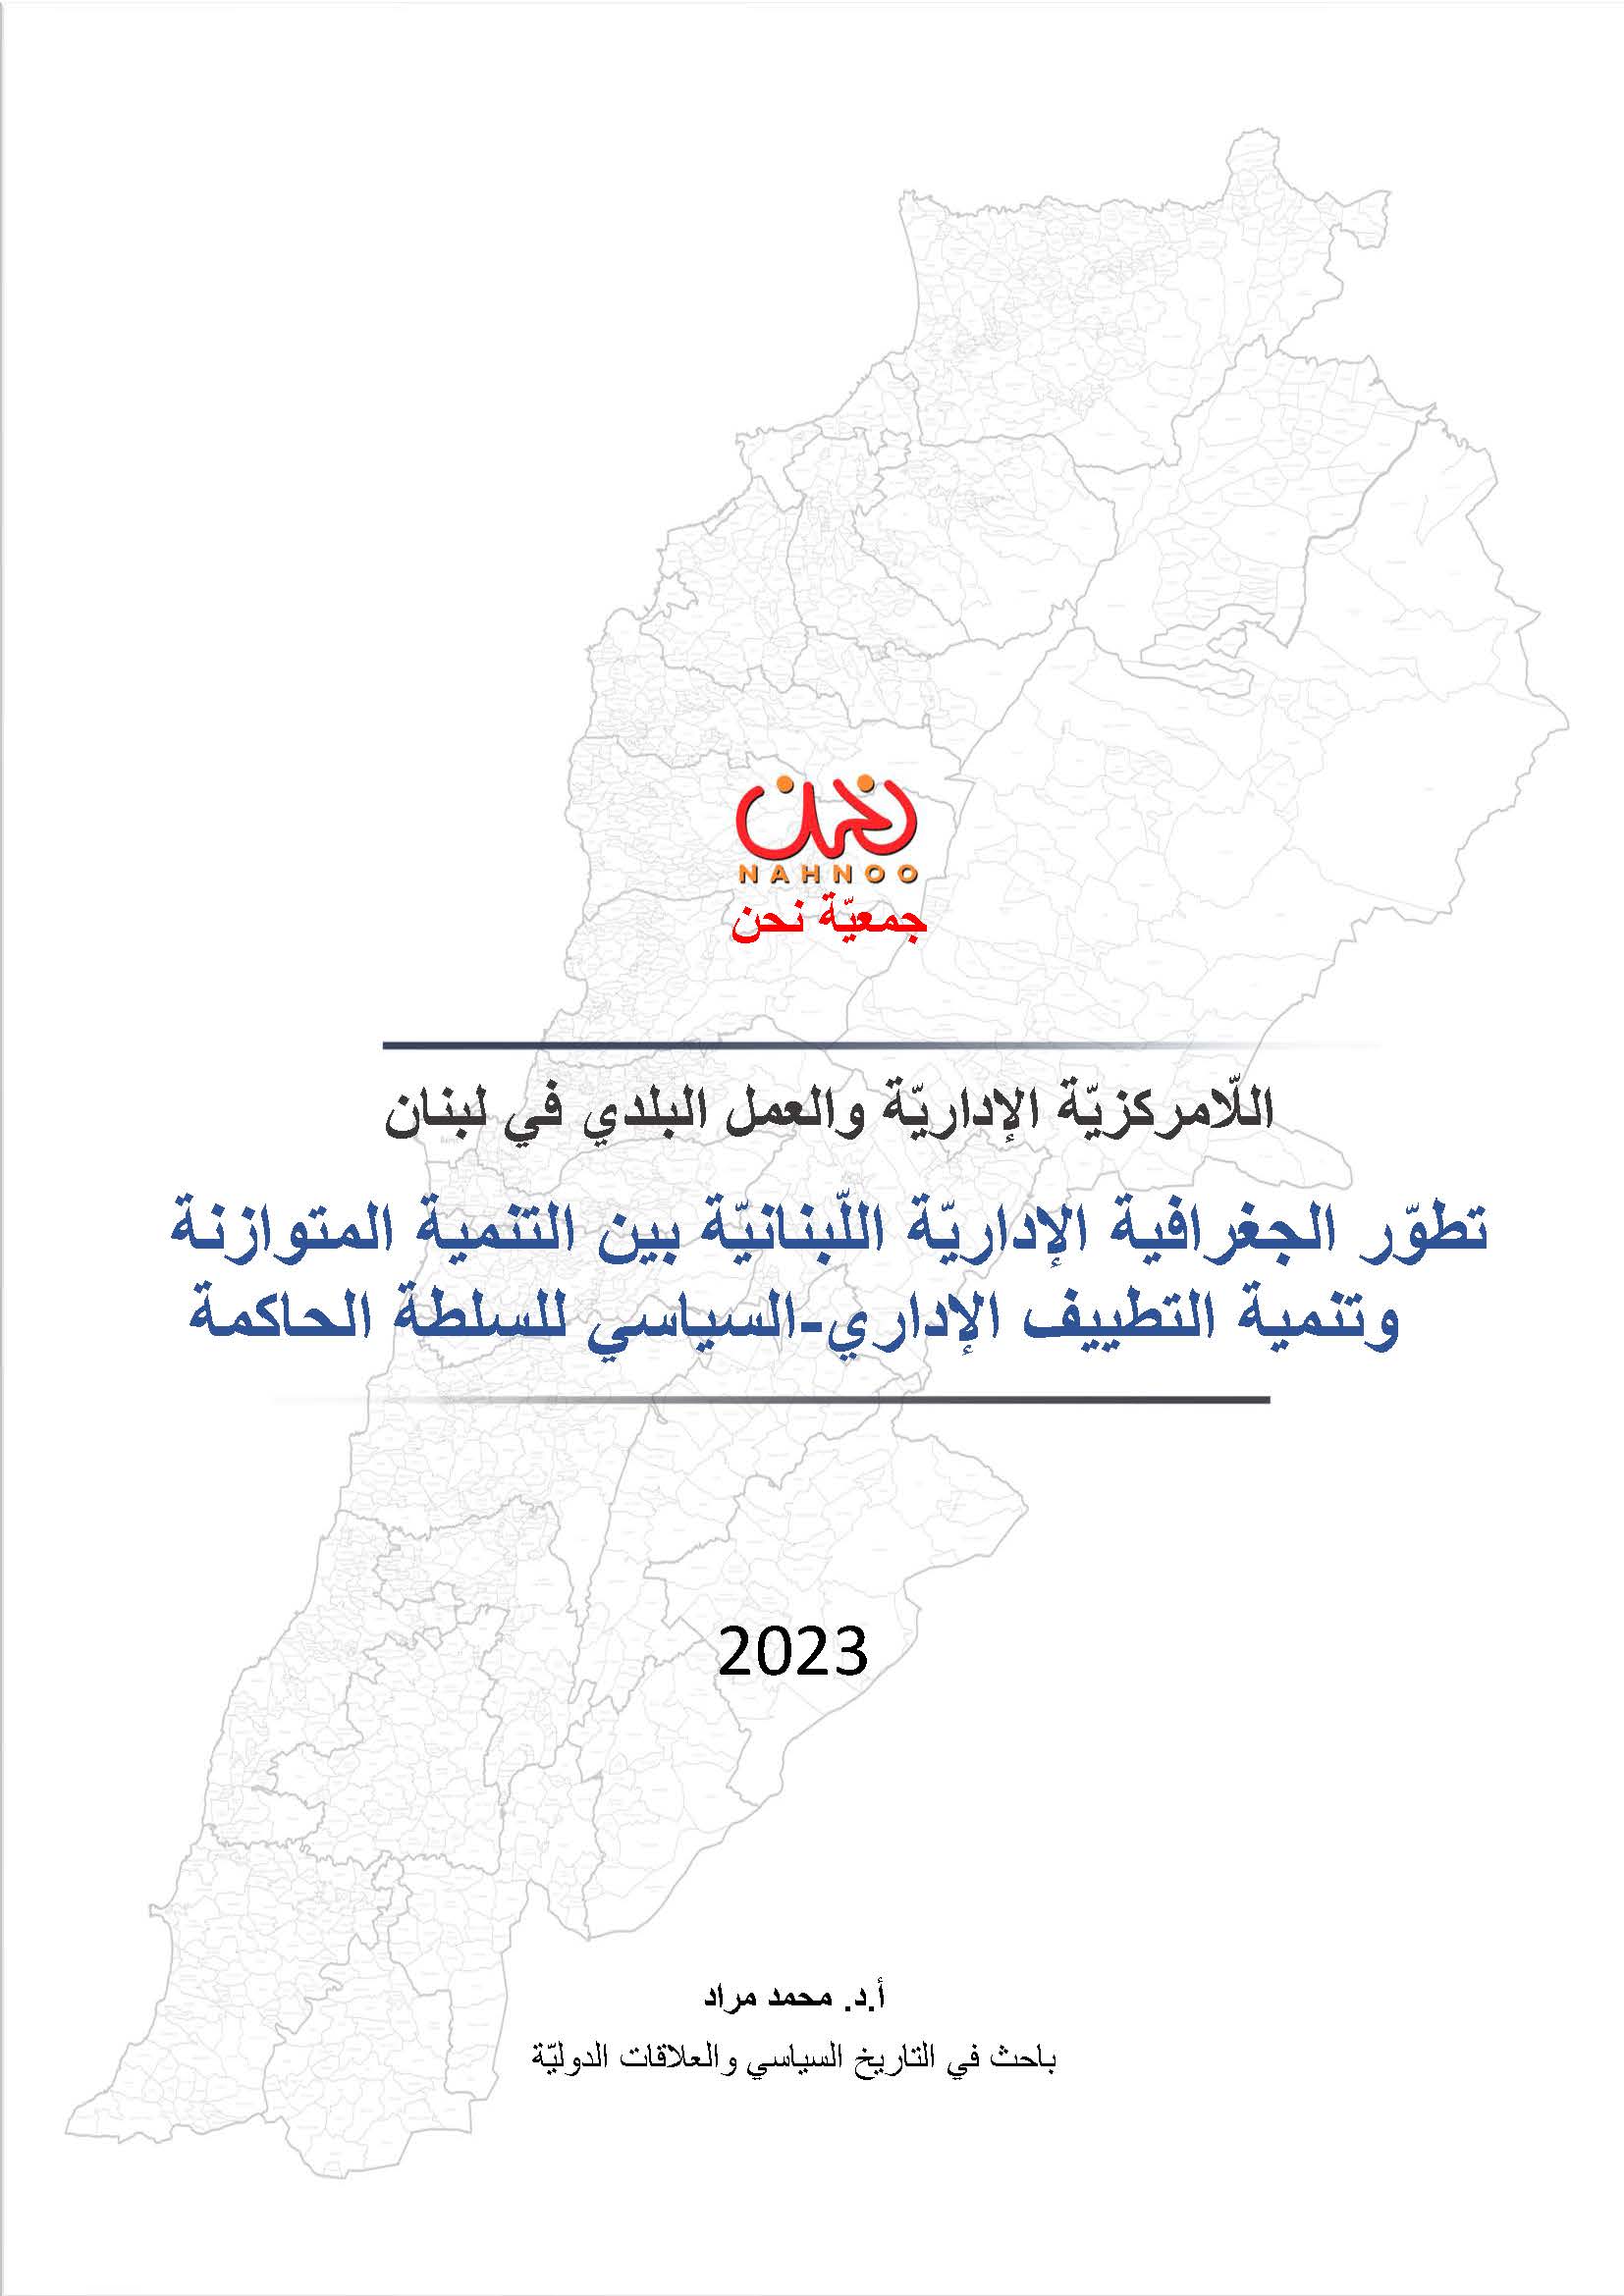 Decentrlization and Municipal Work in Lebanon 2023-Evolution of the administrative geography